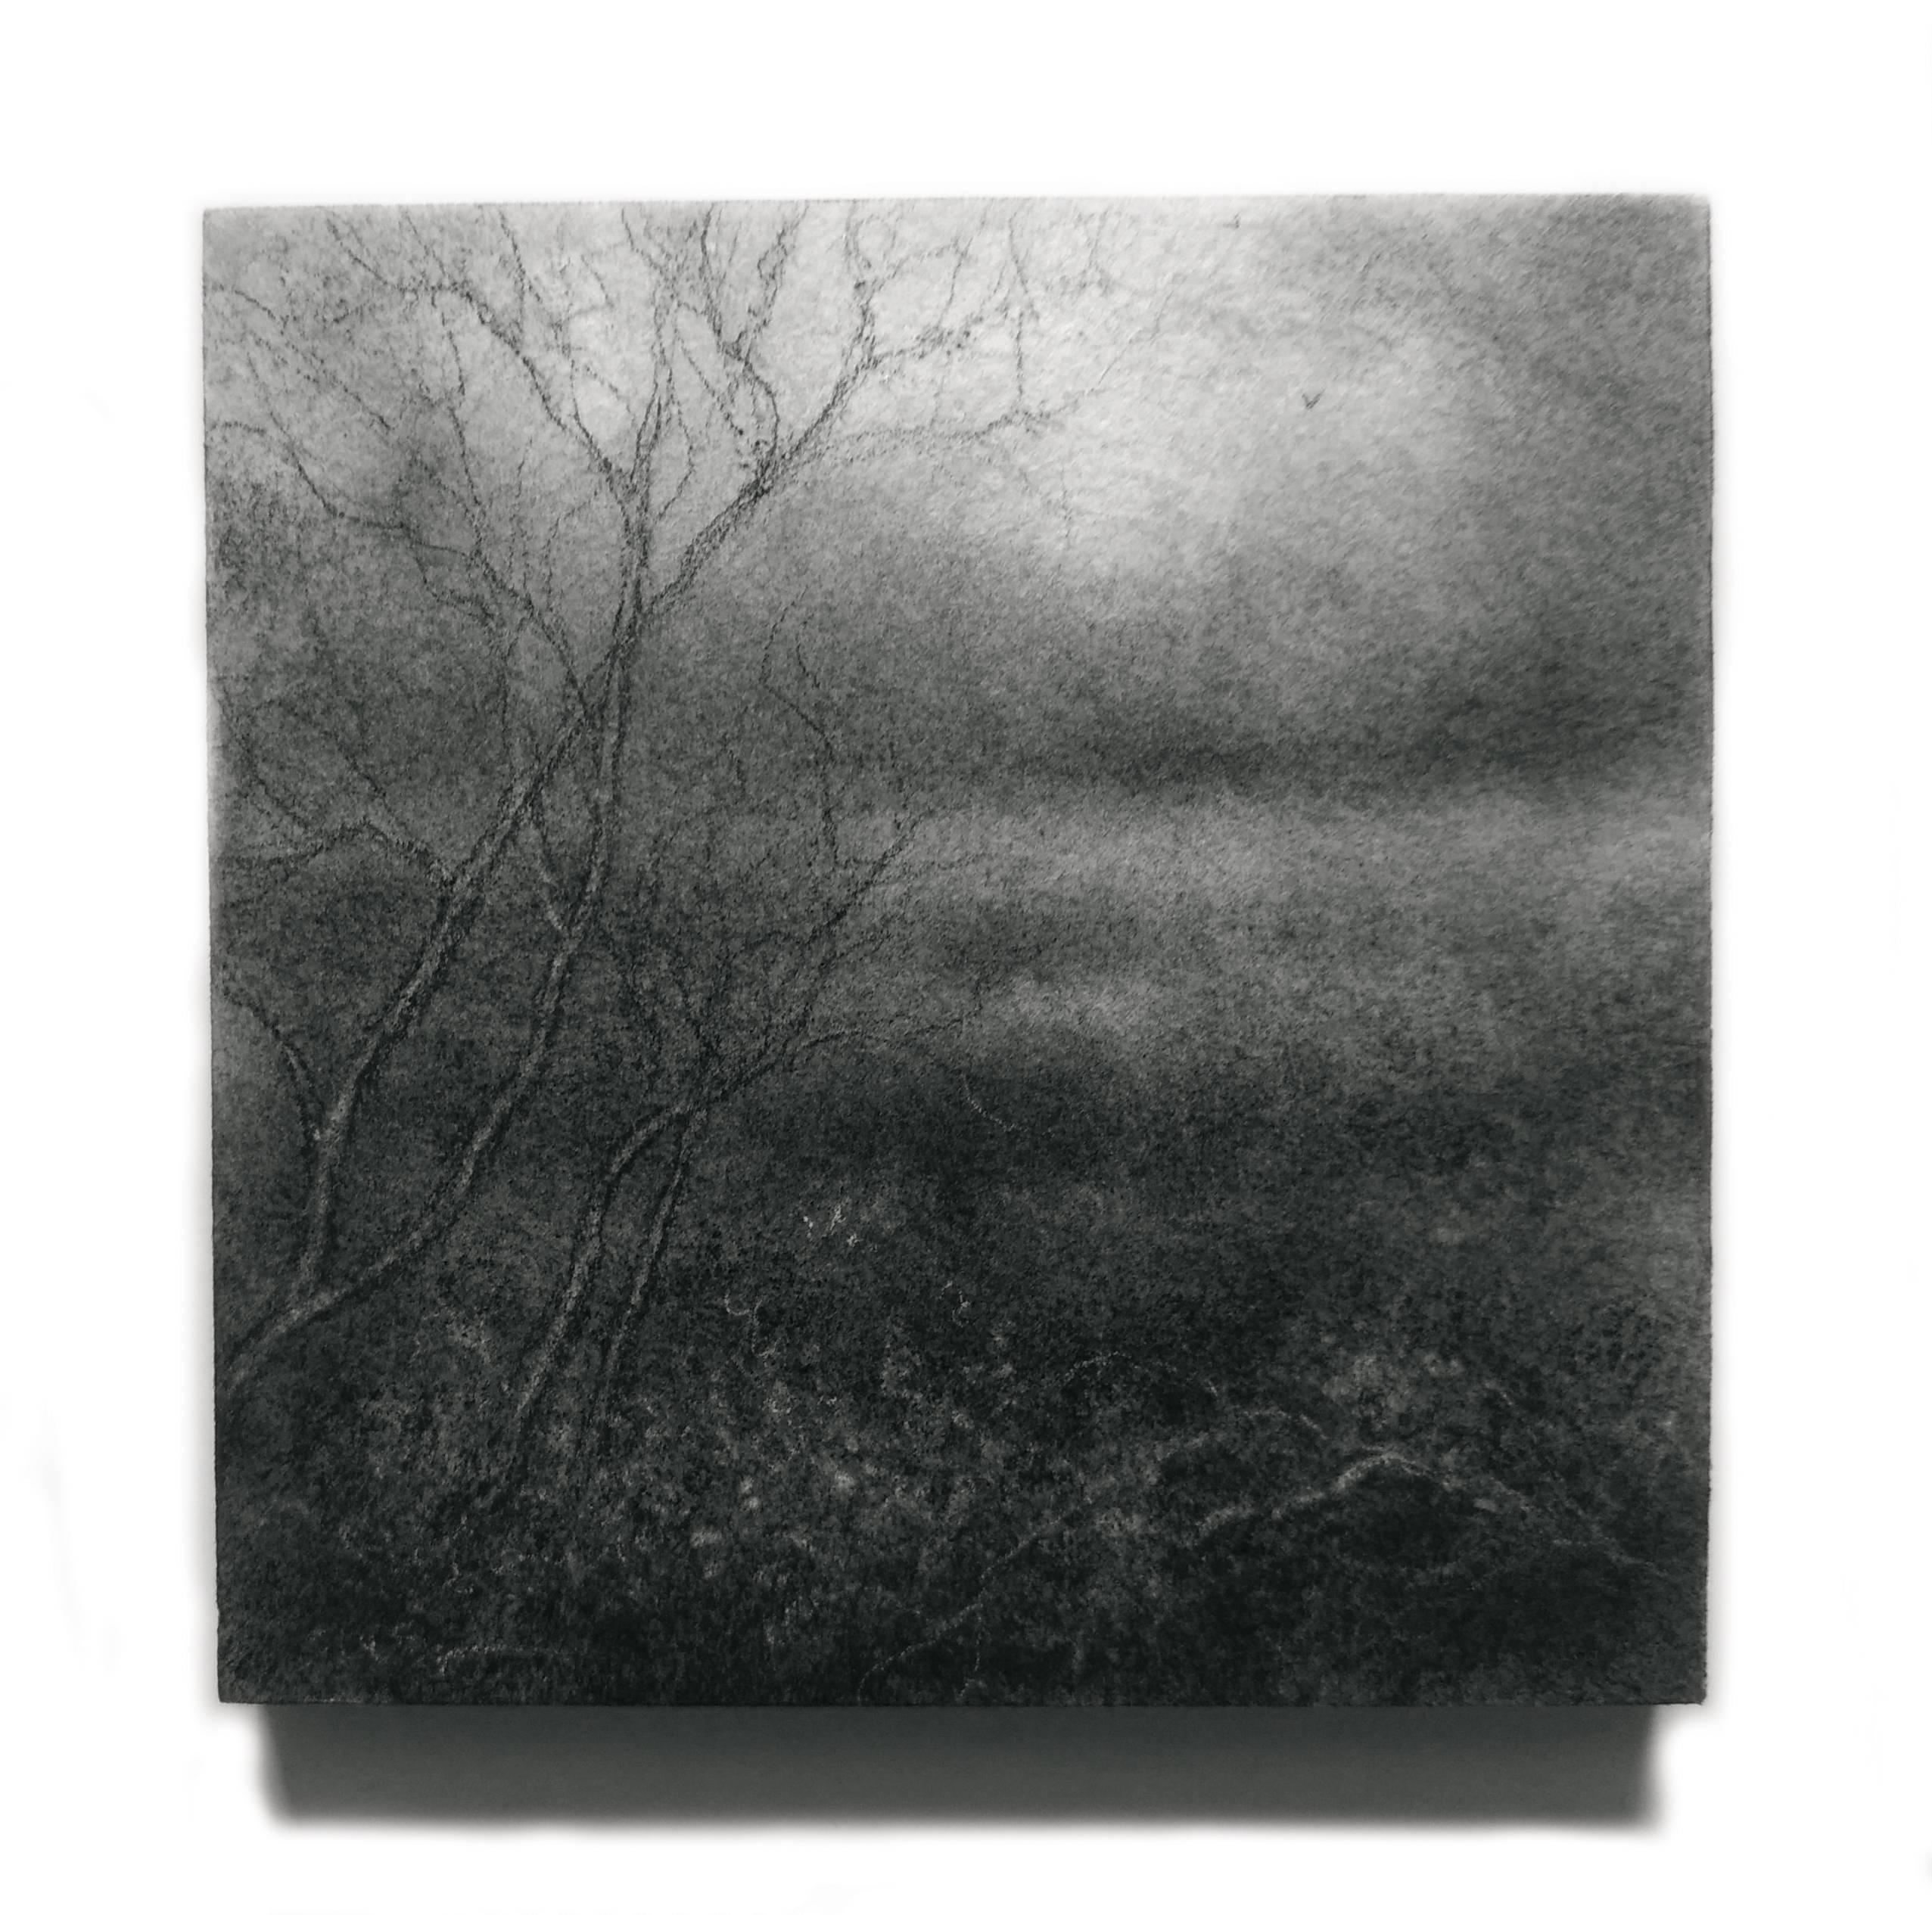 Edgeland L (Small Contemporary Realistic Landscape of Forest in Black Charcoal) - Art by Sue Bryan